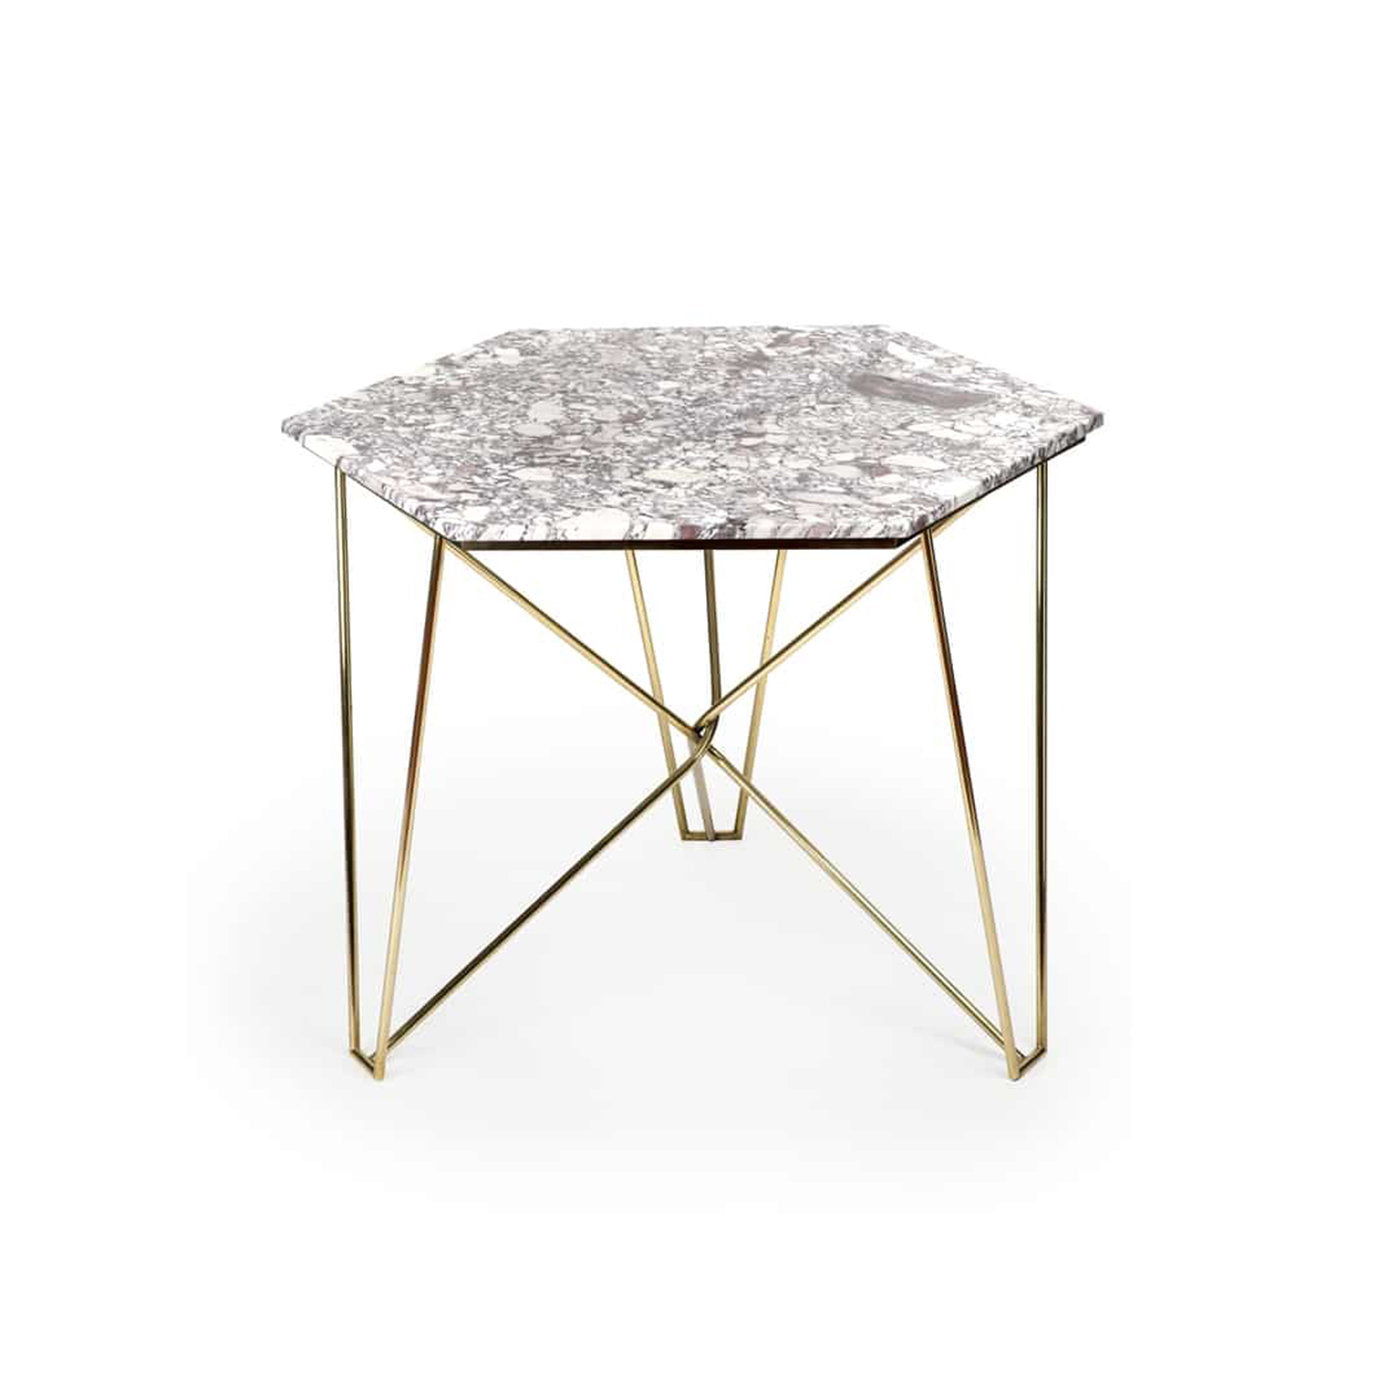 Solid Statement Small Dining Table - Alternative view 1